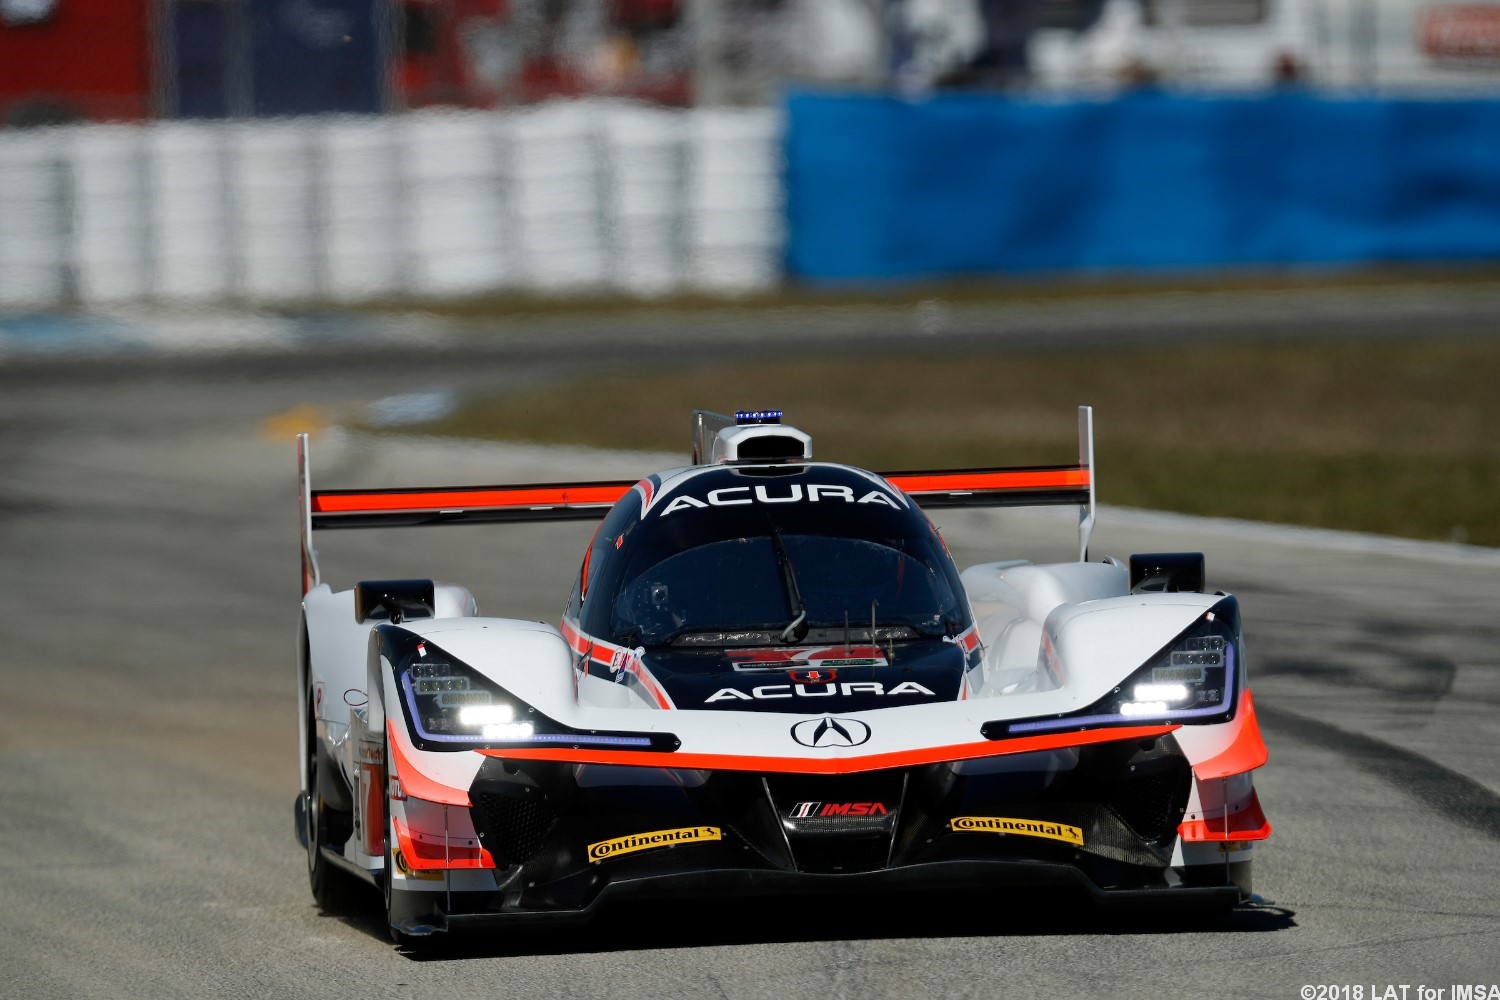 #7 Acura led both sessions